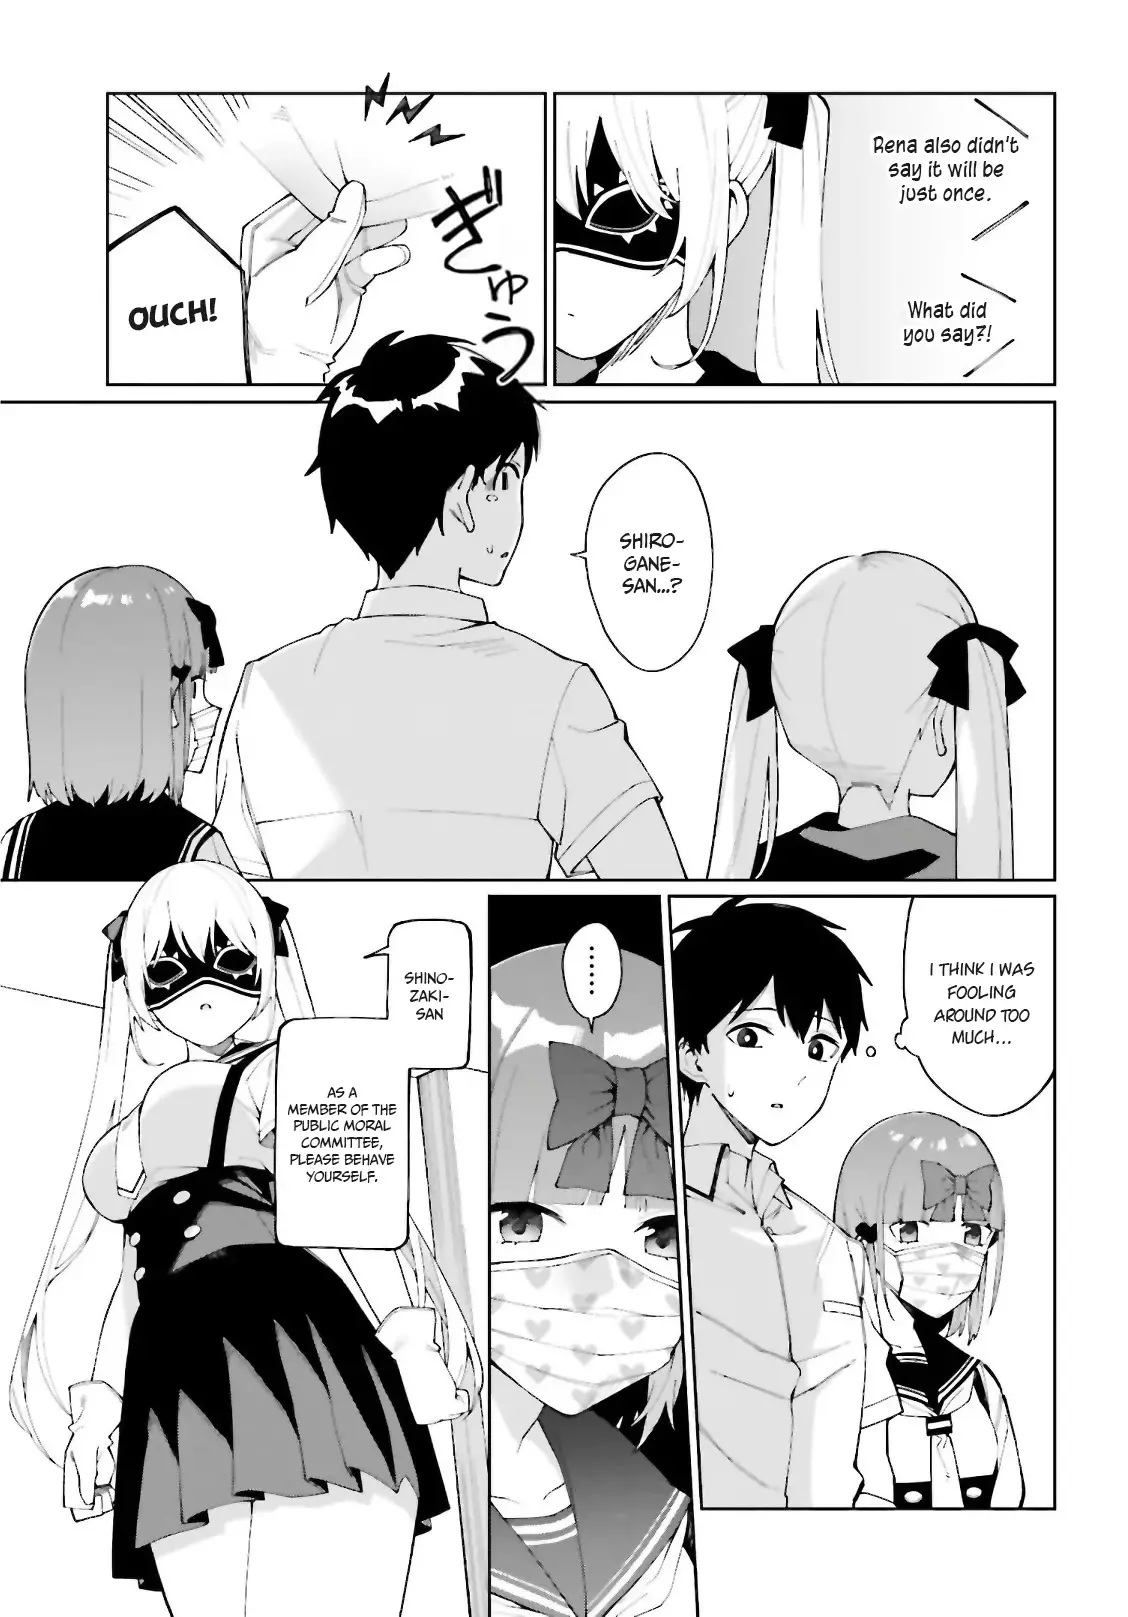 I Don't Understand Shirogane-San's Facial Expression At All - 7 page 12-2f07f875